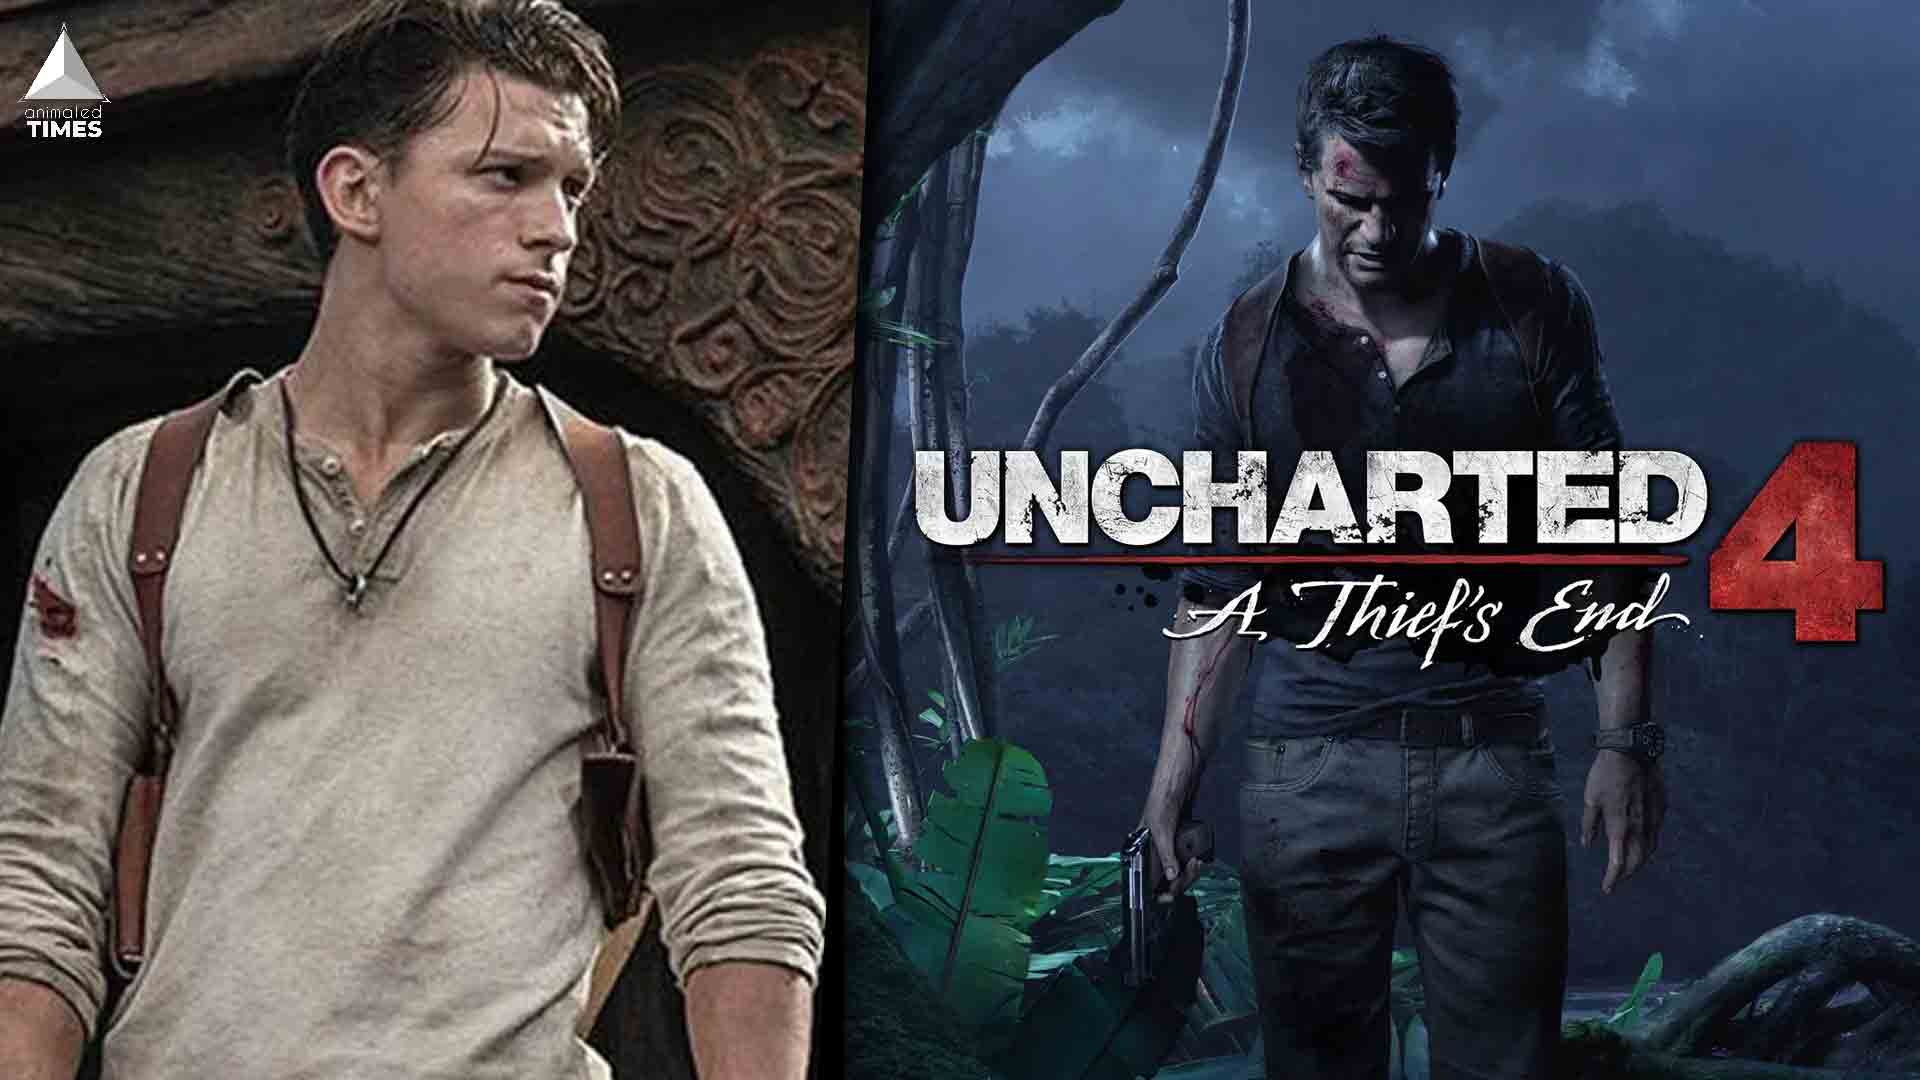 Uncharted First Footage Of The Movie Arrives in an Unexpected Way